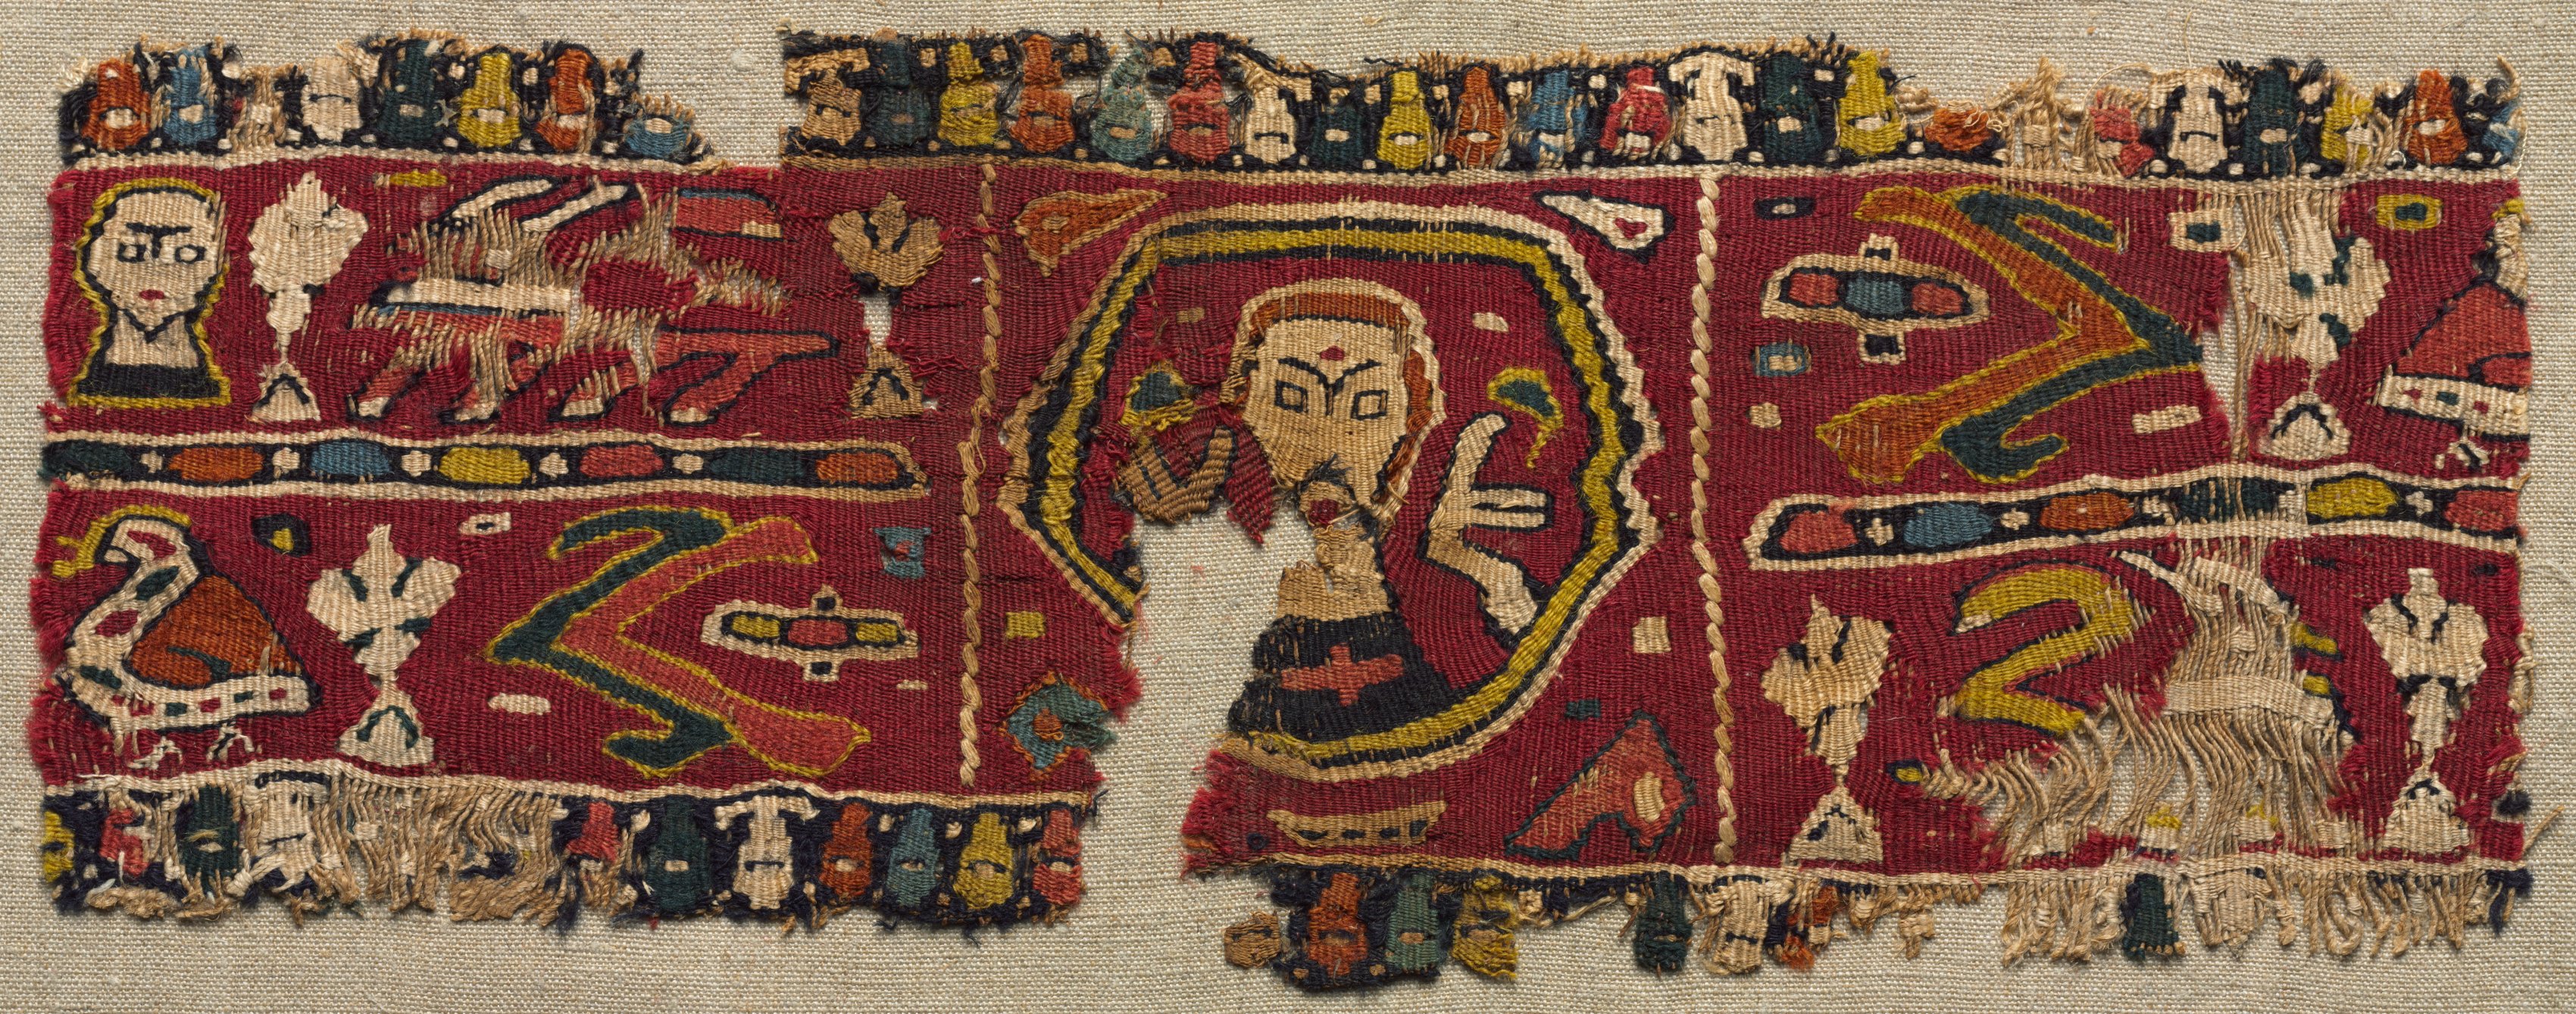 Sleeve Band from a Tunic